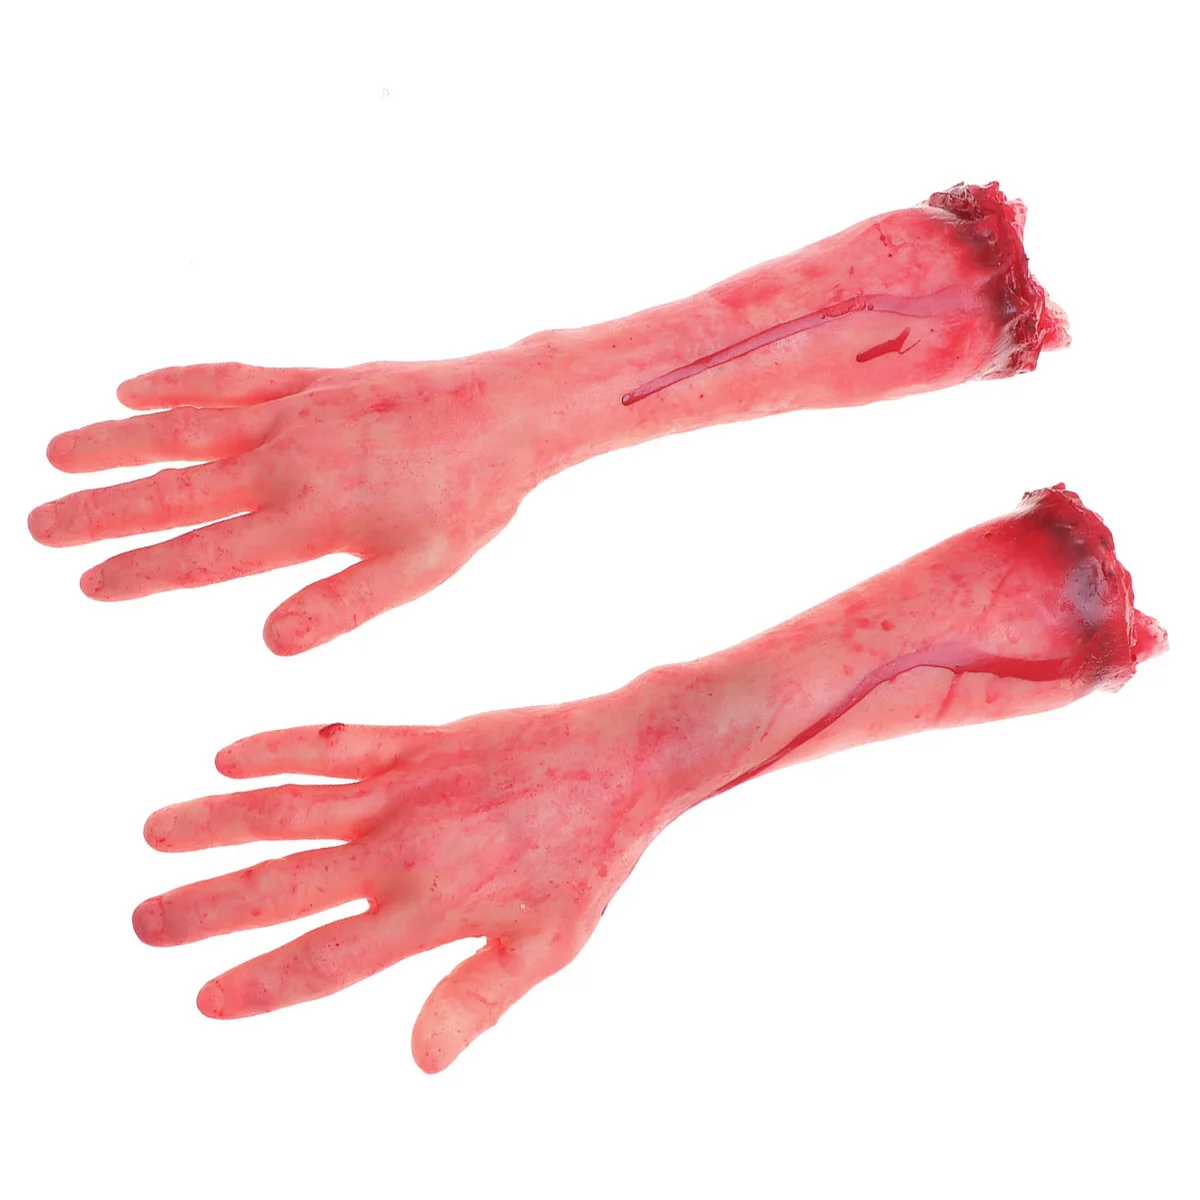 

Hand Body Fake Parts Hands Severed Blood Broken Human Propscreepyarm Dead Decorations Prop Trick Zombie Feetrubber Corpse